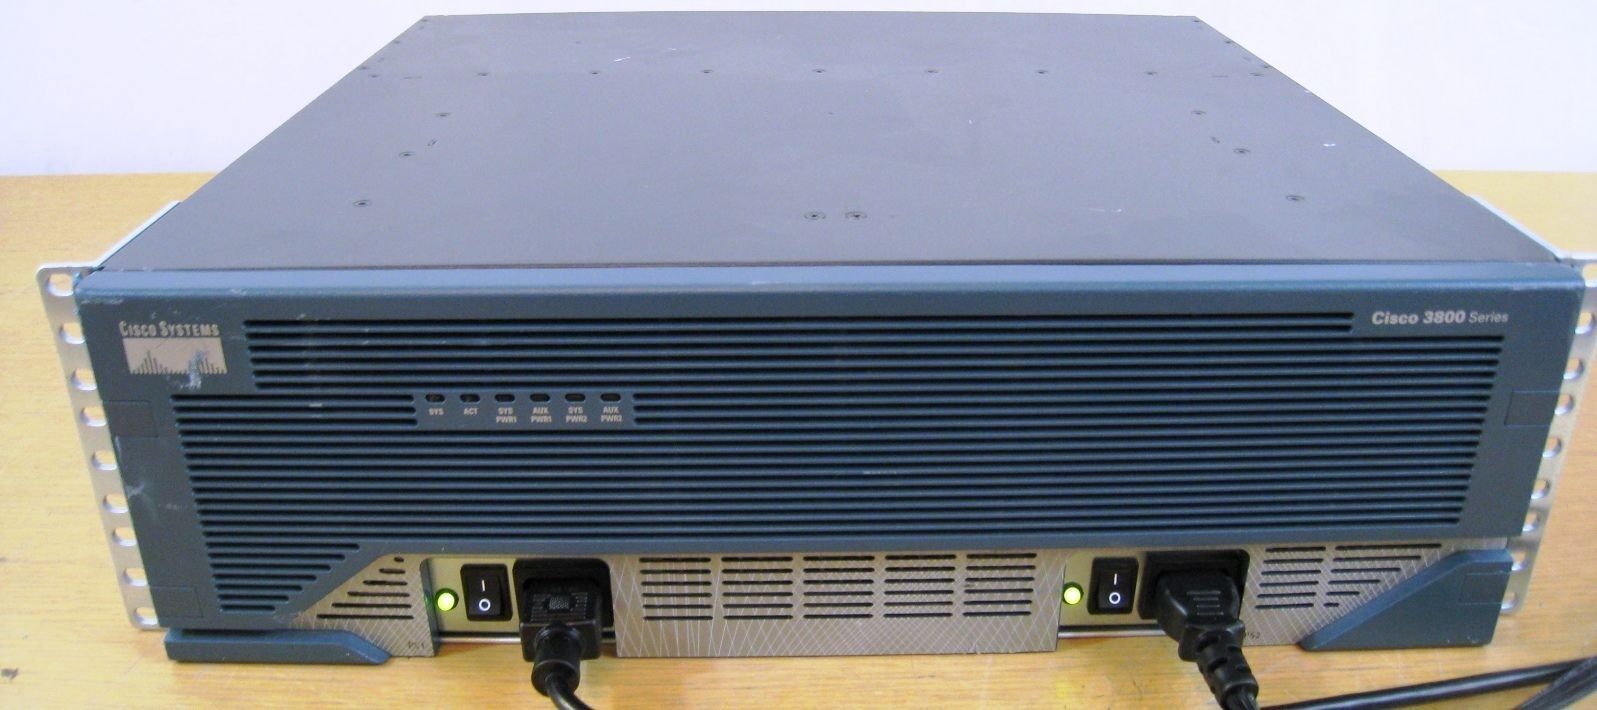 CISCO 3845 Intergrated Router IOS 15.1 1GB Dram/256MB Flash w/ DUAL Power Supply